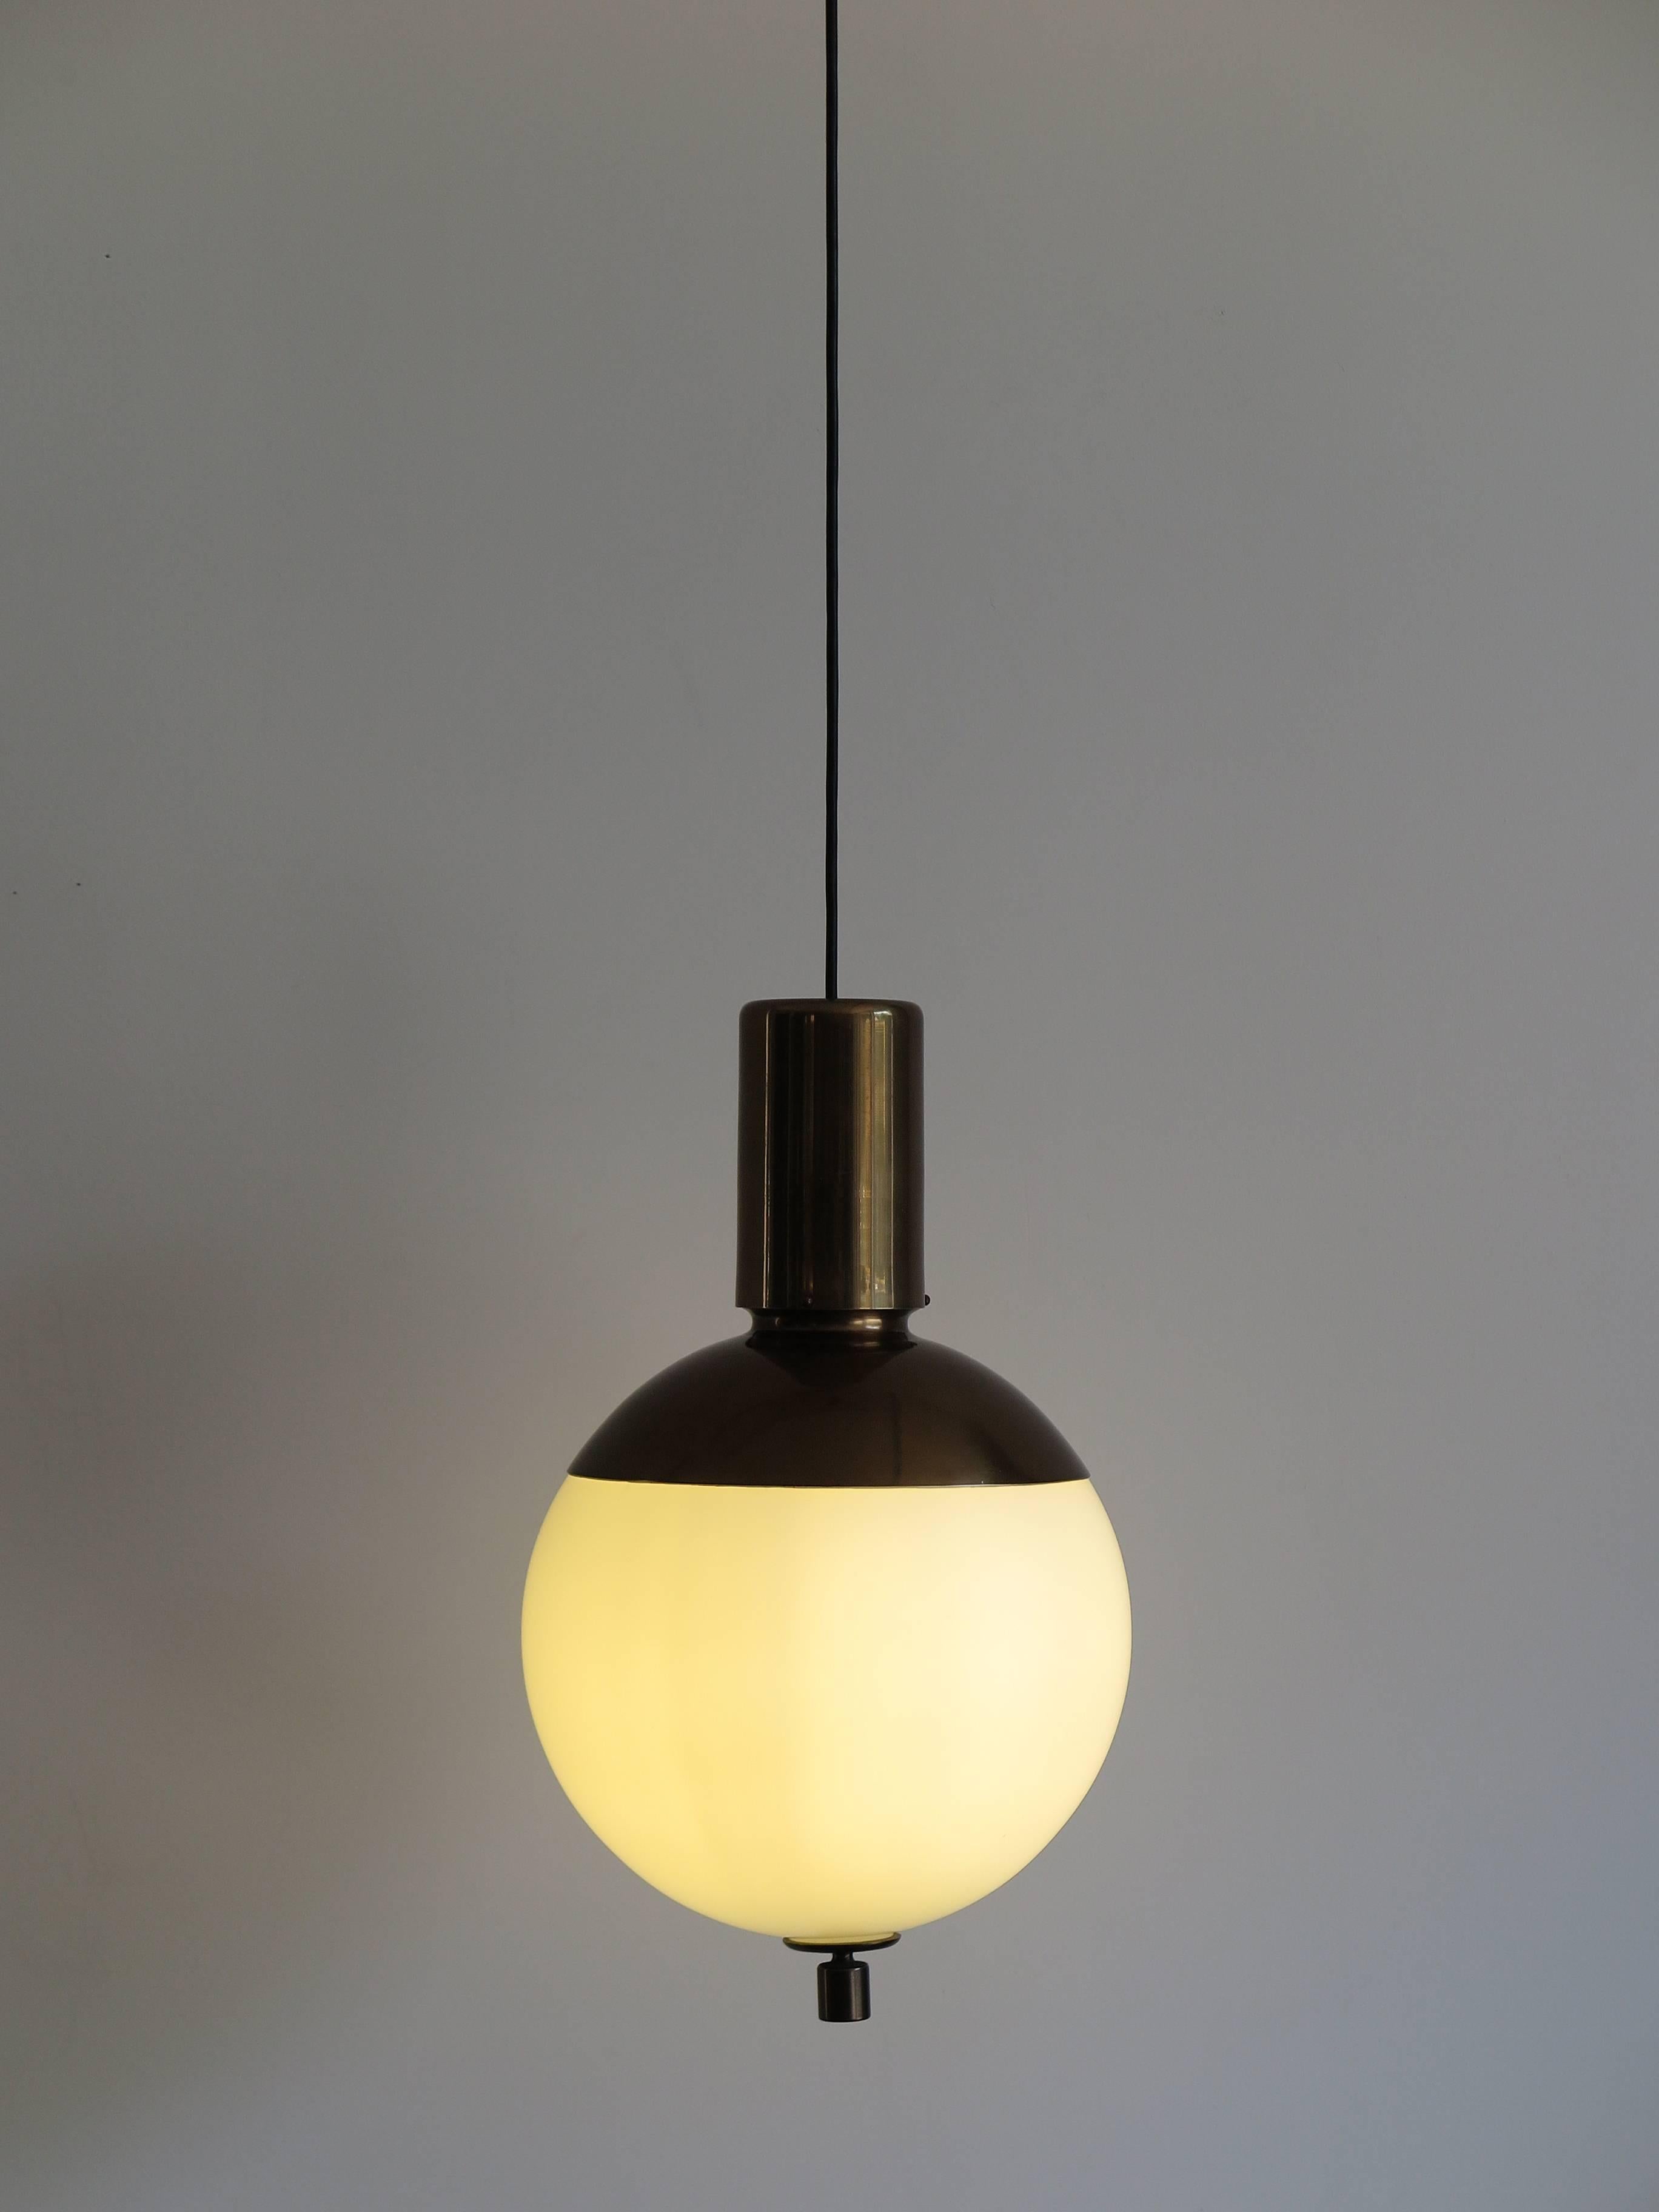 1960s Italian pendant lamp with brass and opaline glass, Mid-Century Modern design.